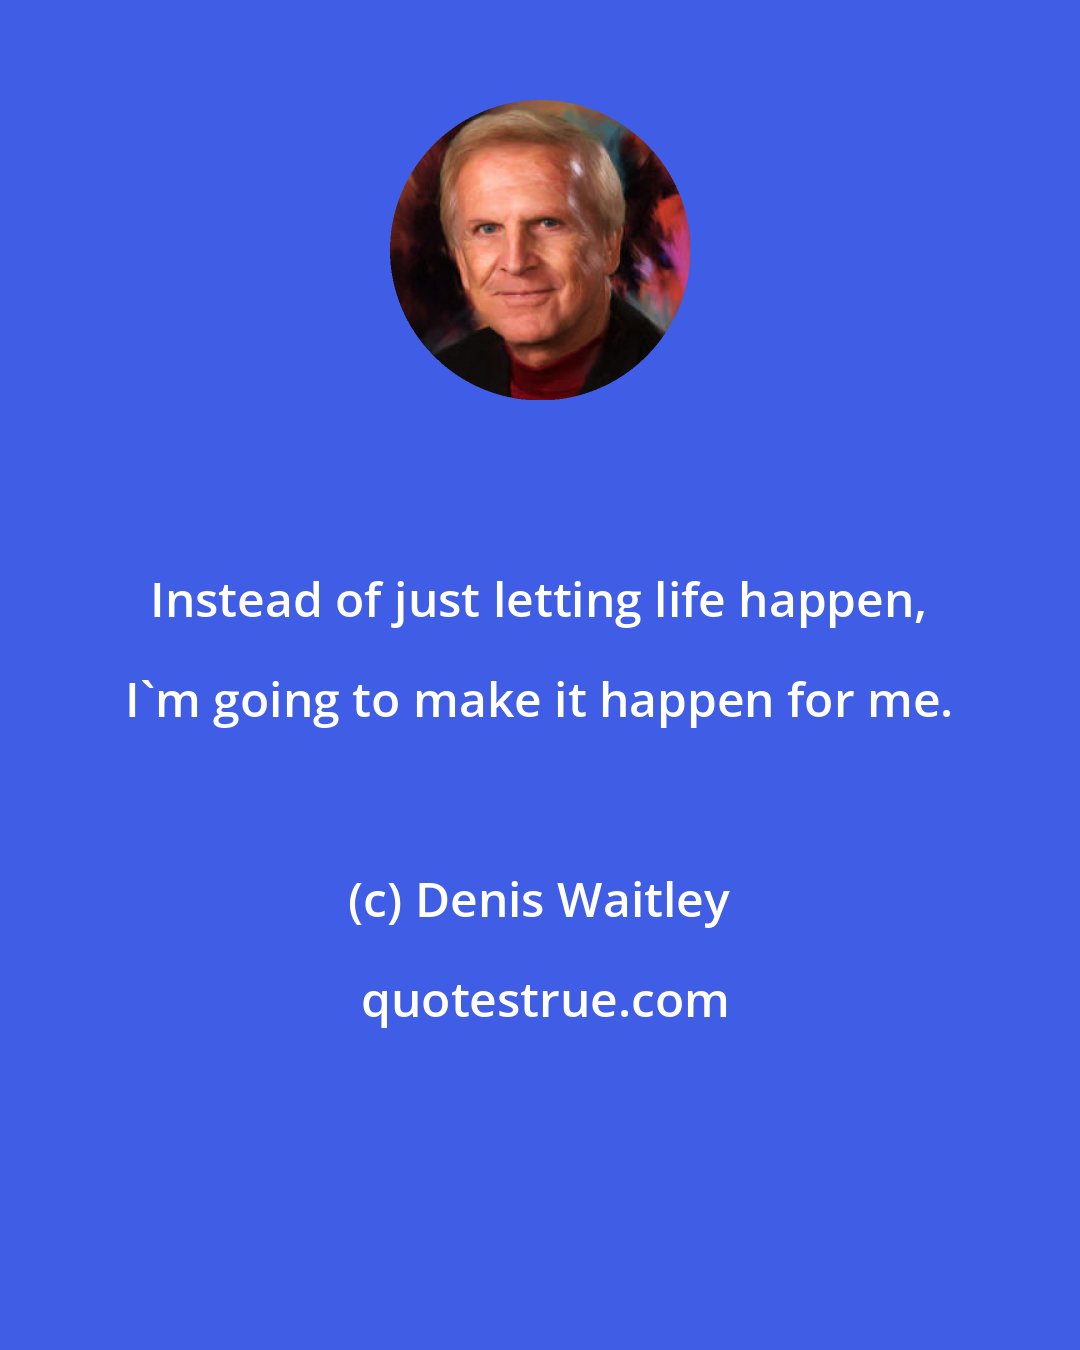 Denis Waitley: Instead of just letting life happen, I'm going to make it happen for me.